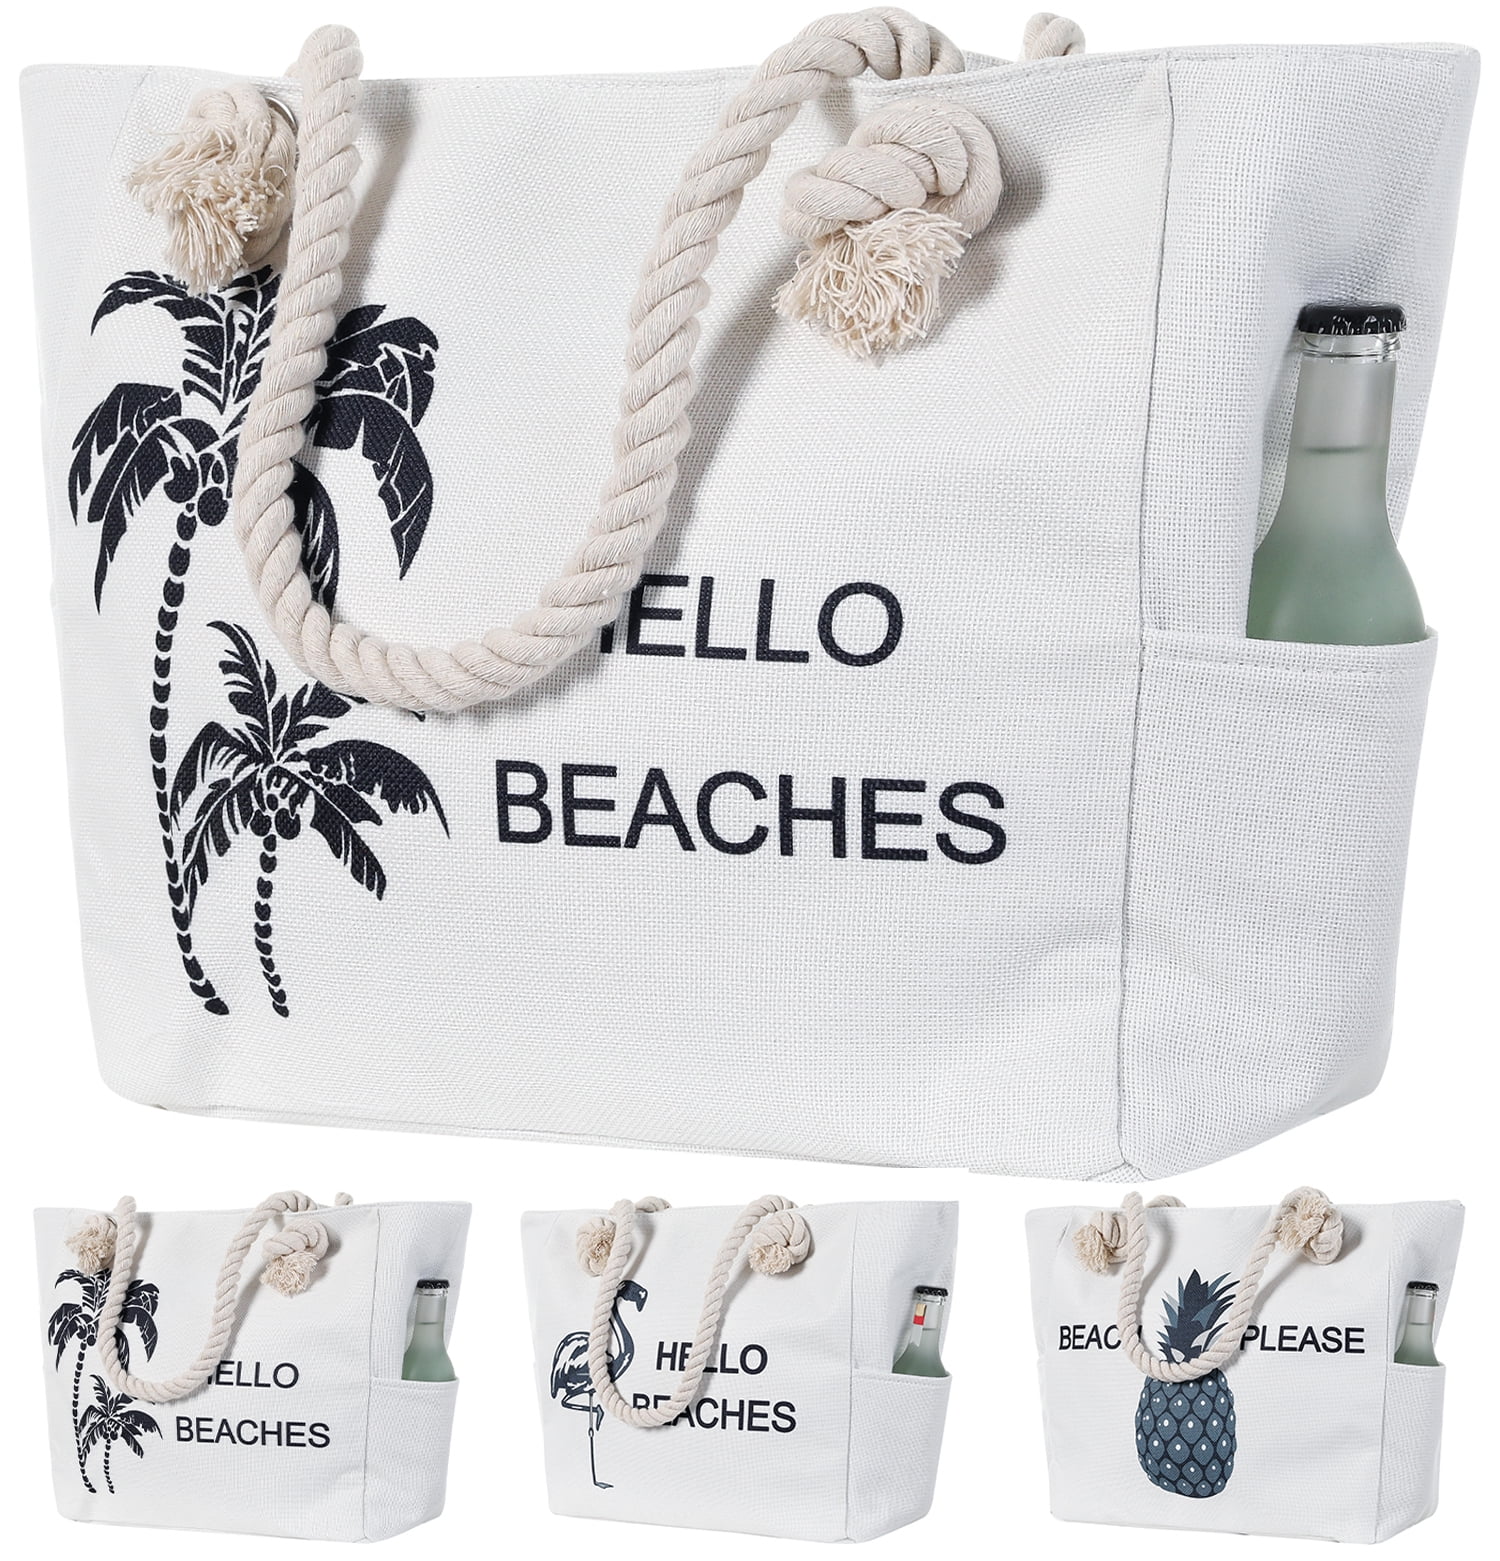 SANDY Over Sized Canvas Tote Bag Ladies Trip Tote Bag Gift 